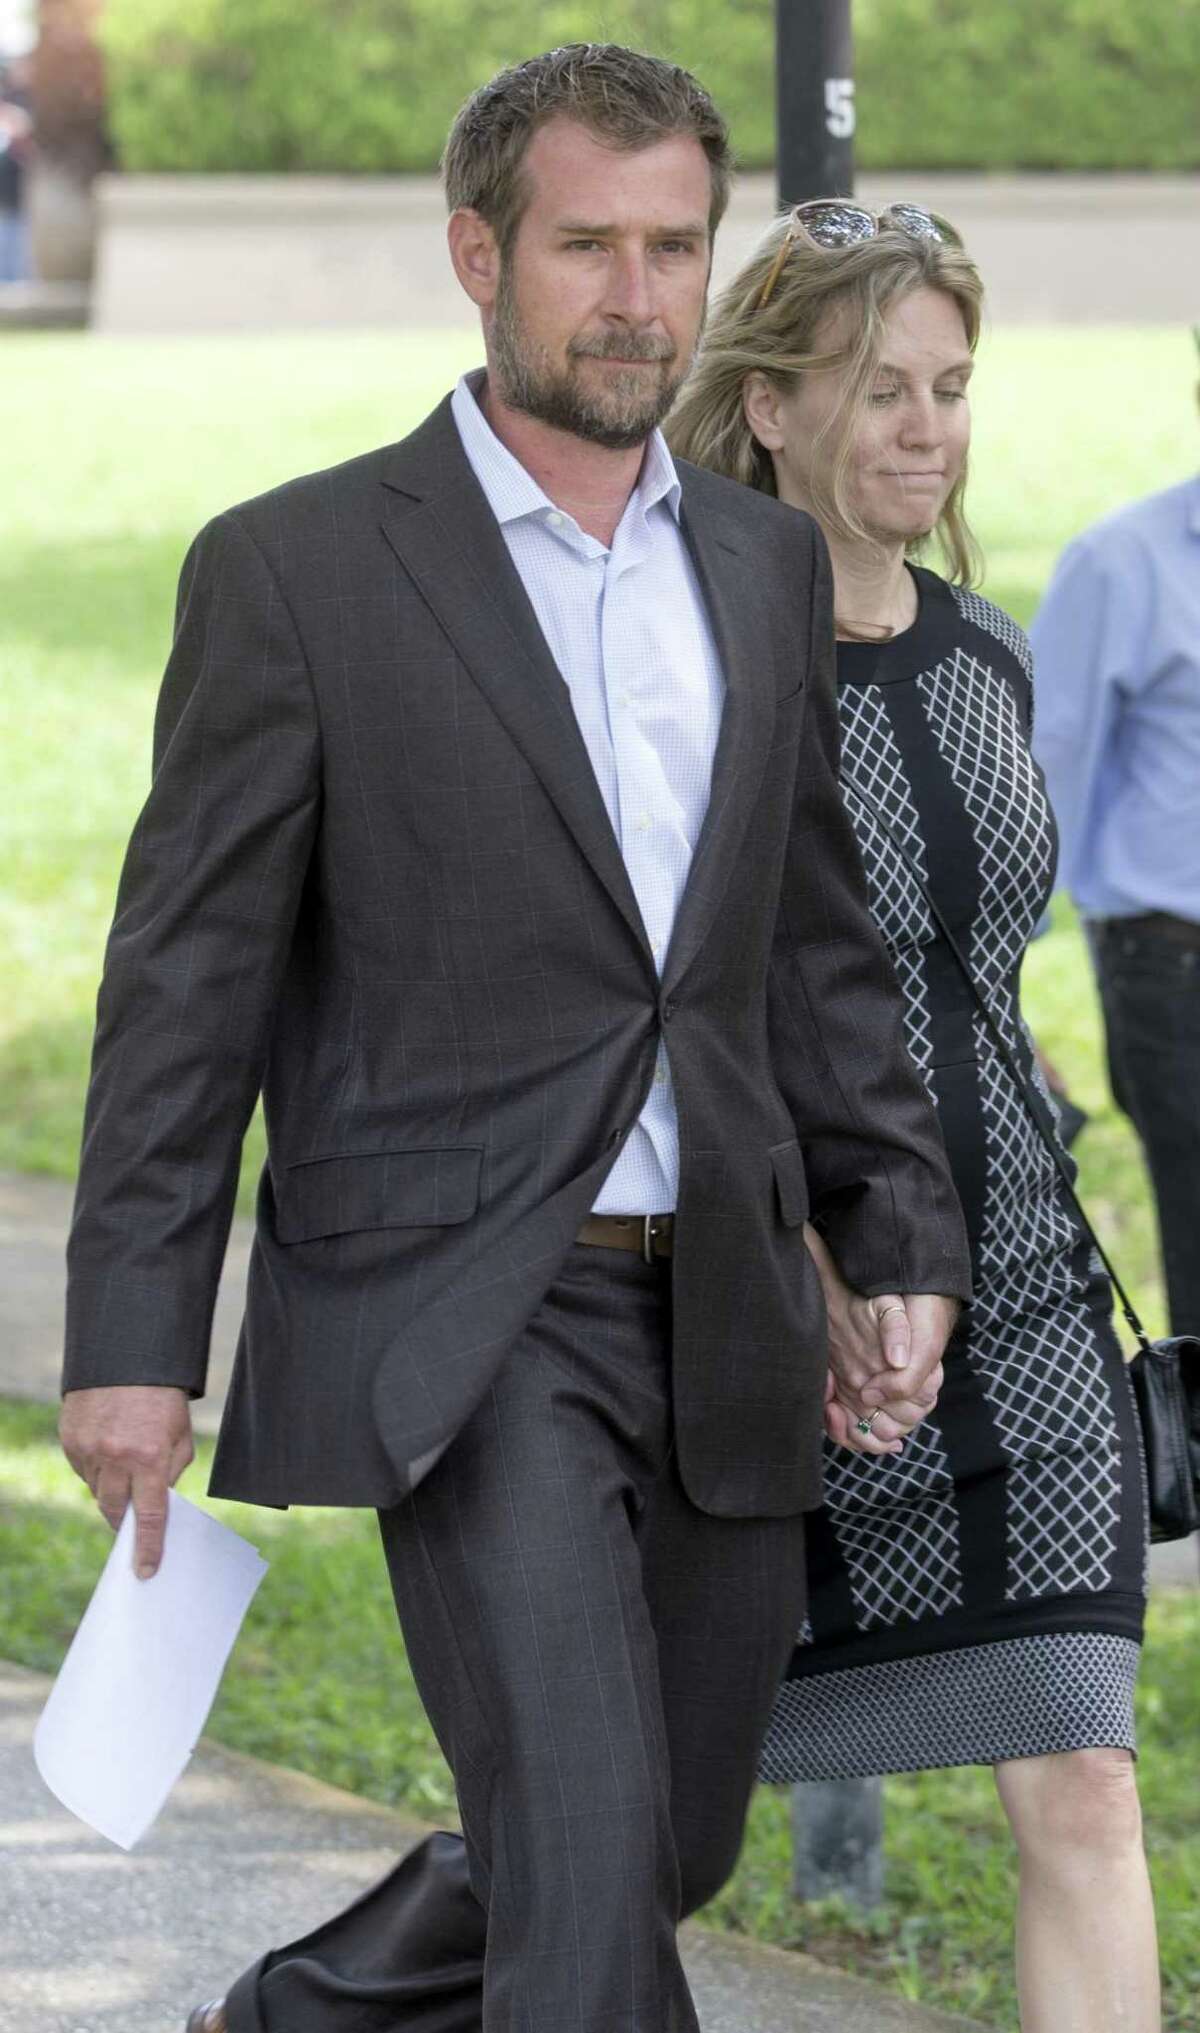 Lawyers for Lubbock businessman Vernon C. Farthing, state Sen. Carlos Uresti’s co-defendant, requested a more than five month delay in the trial. The two men will now stand trial beginning Oct. 22. Farthing is seen with his wife, Aurora, leaving the San Antonio federal courthouse in May.